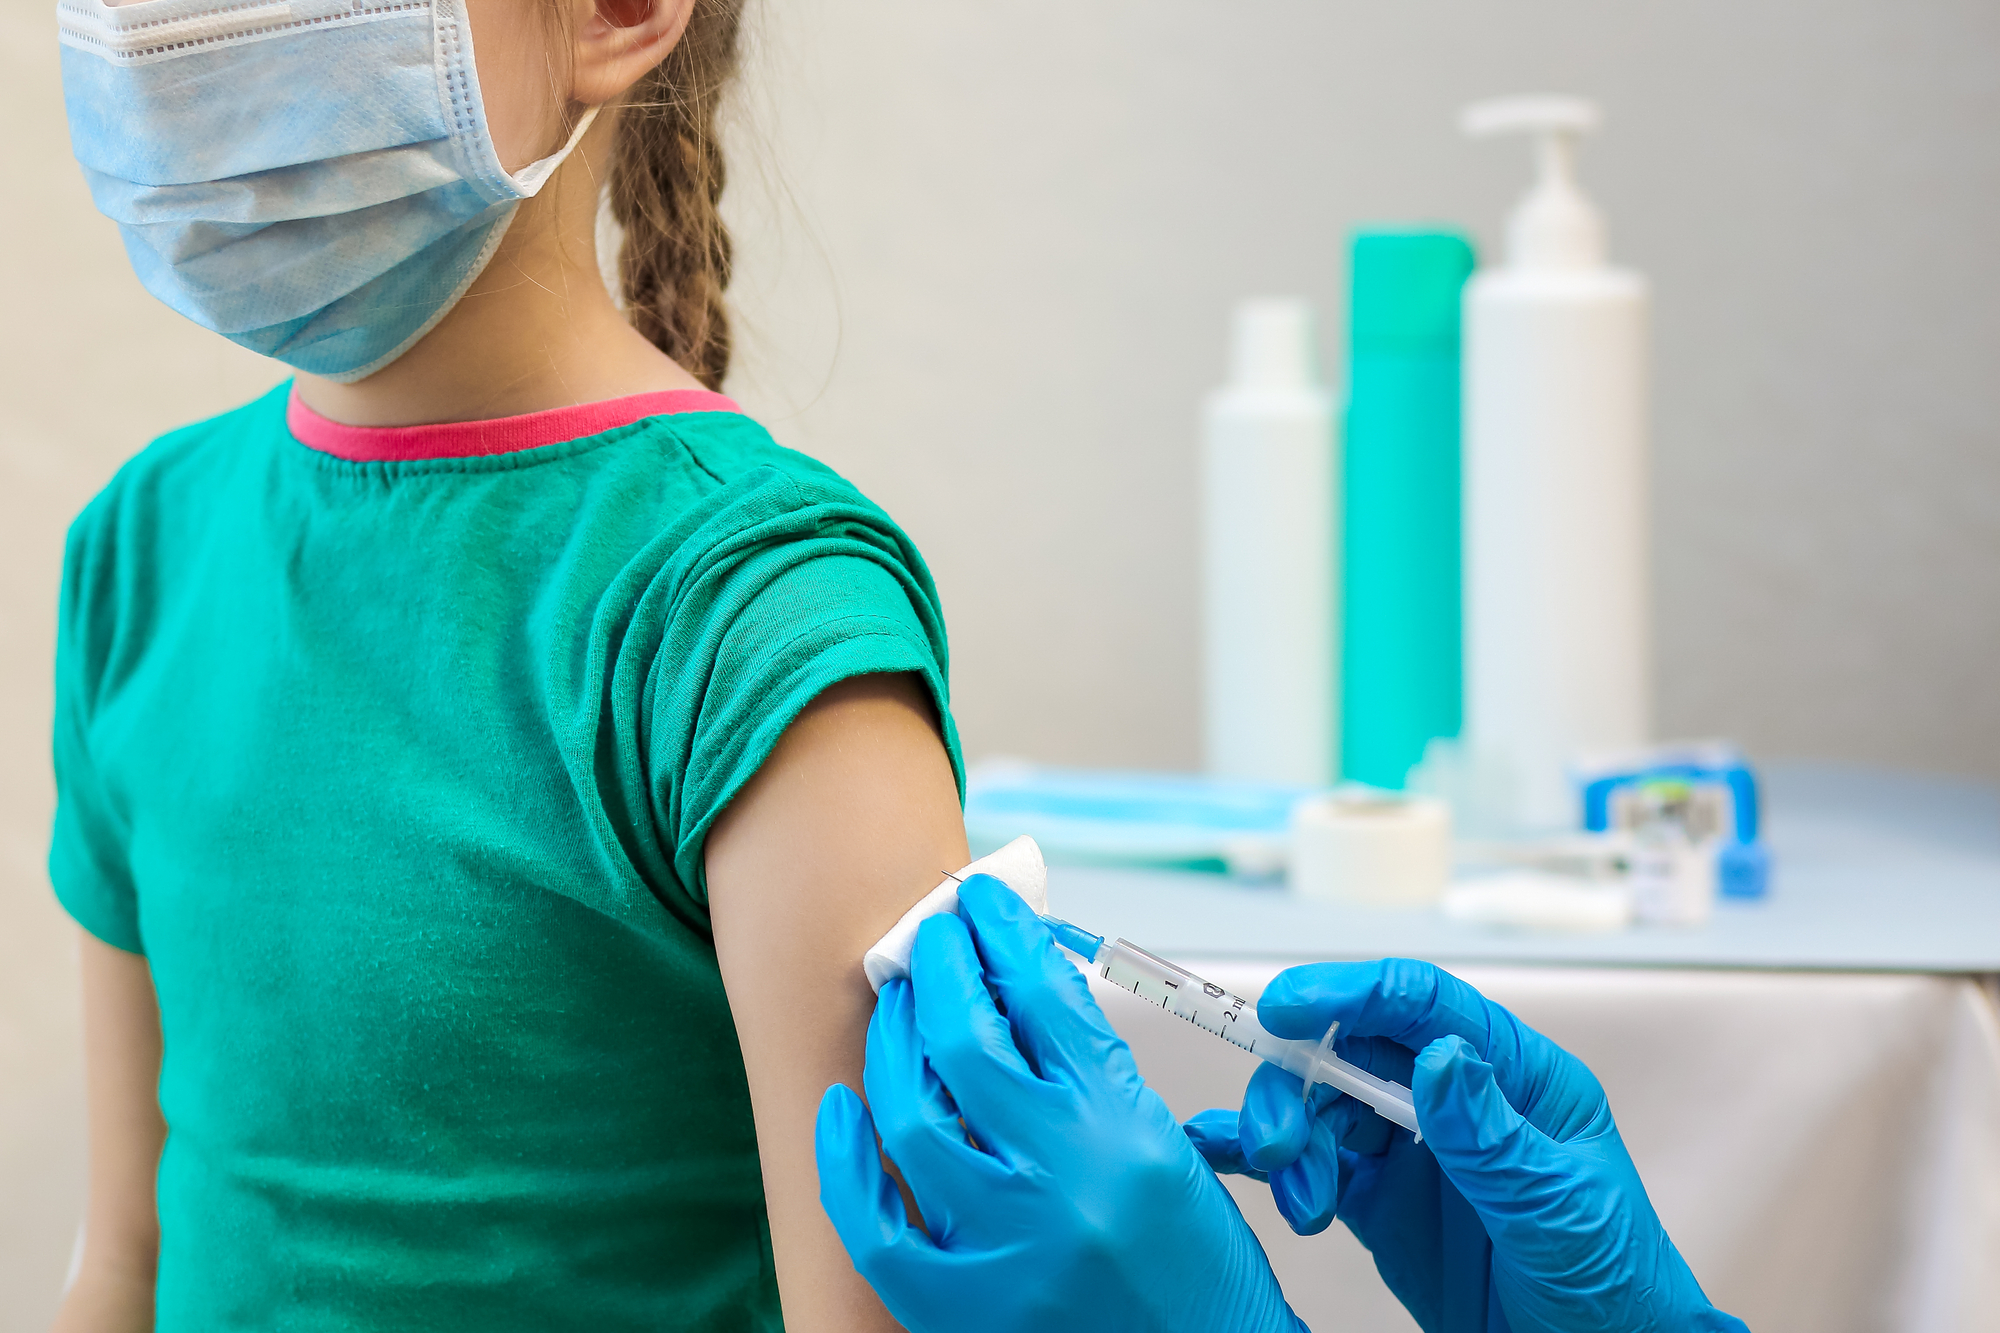 Child receiving a vaccine shot from a healthcare worker in blue gloves